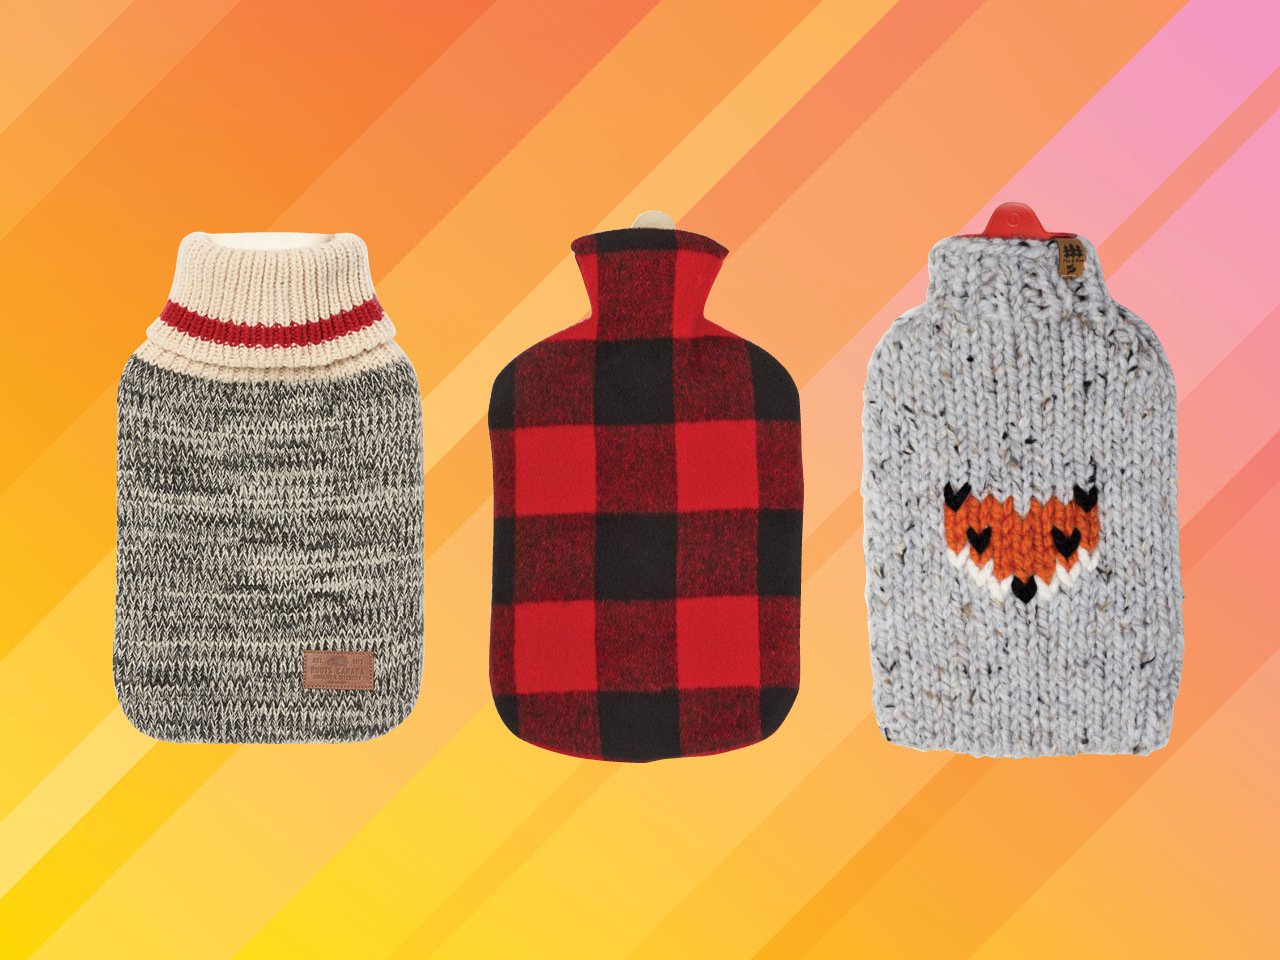 Three hot water bottle covers: One from Roots, like a cozy sock, one a plaid and one knit with a fox